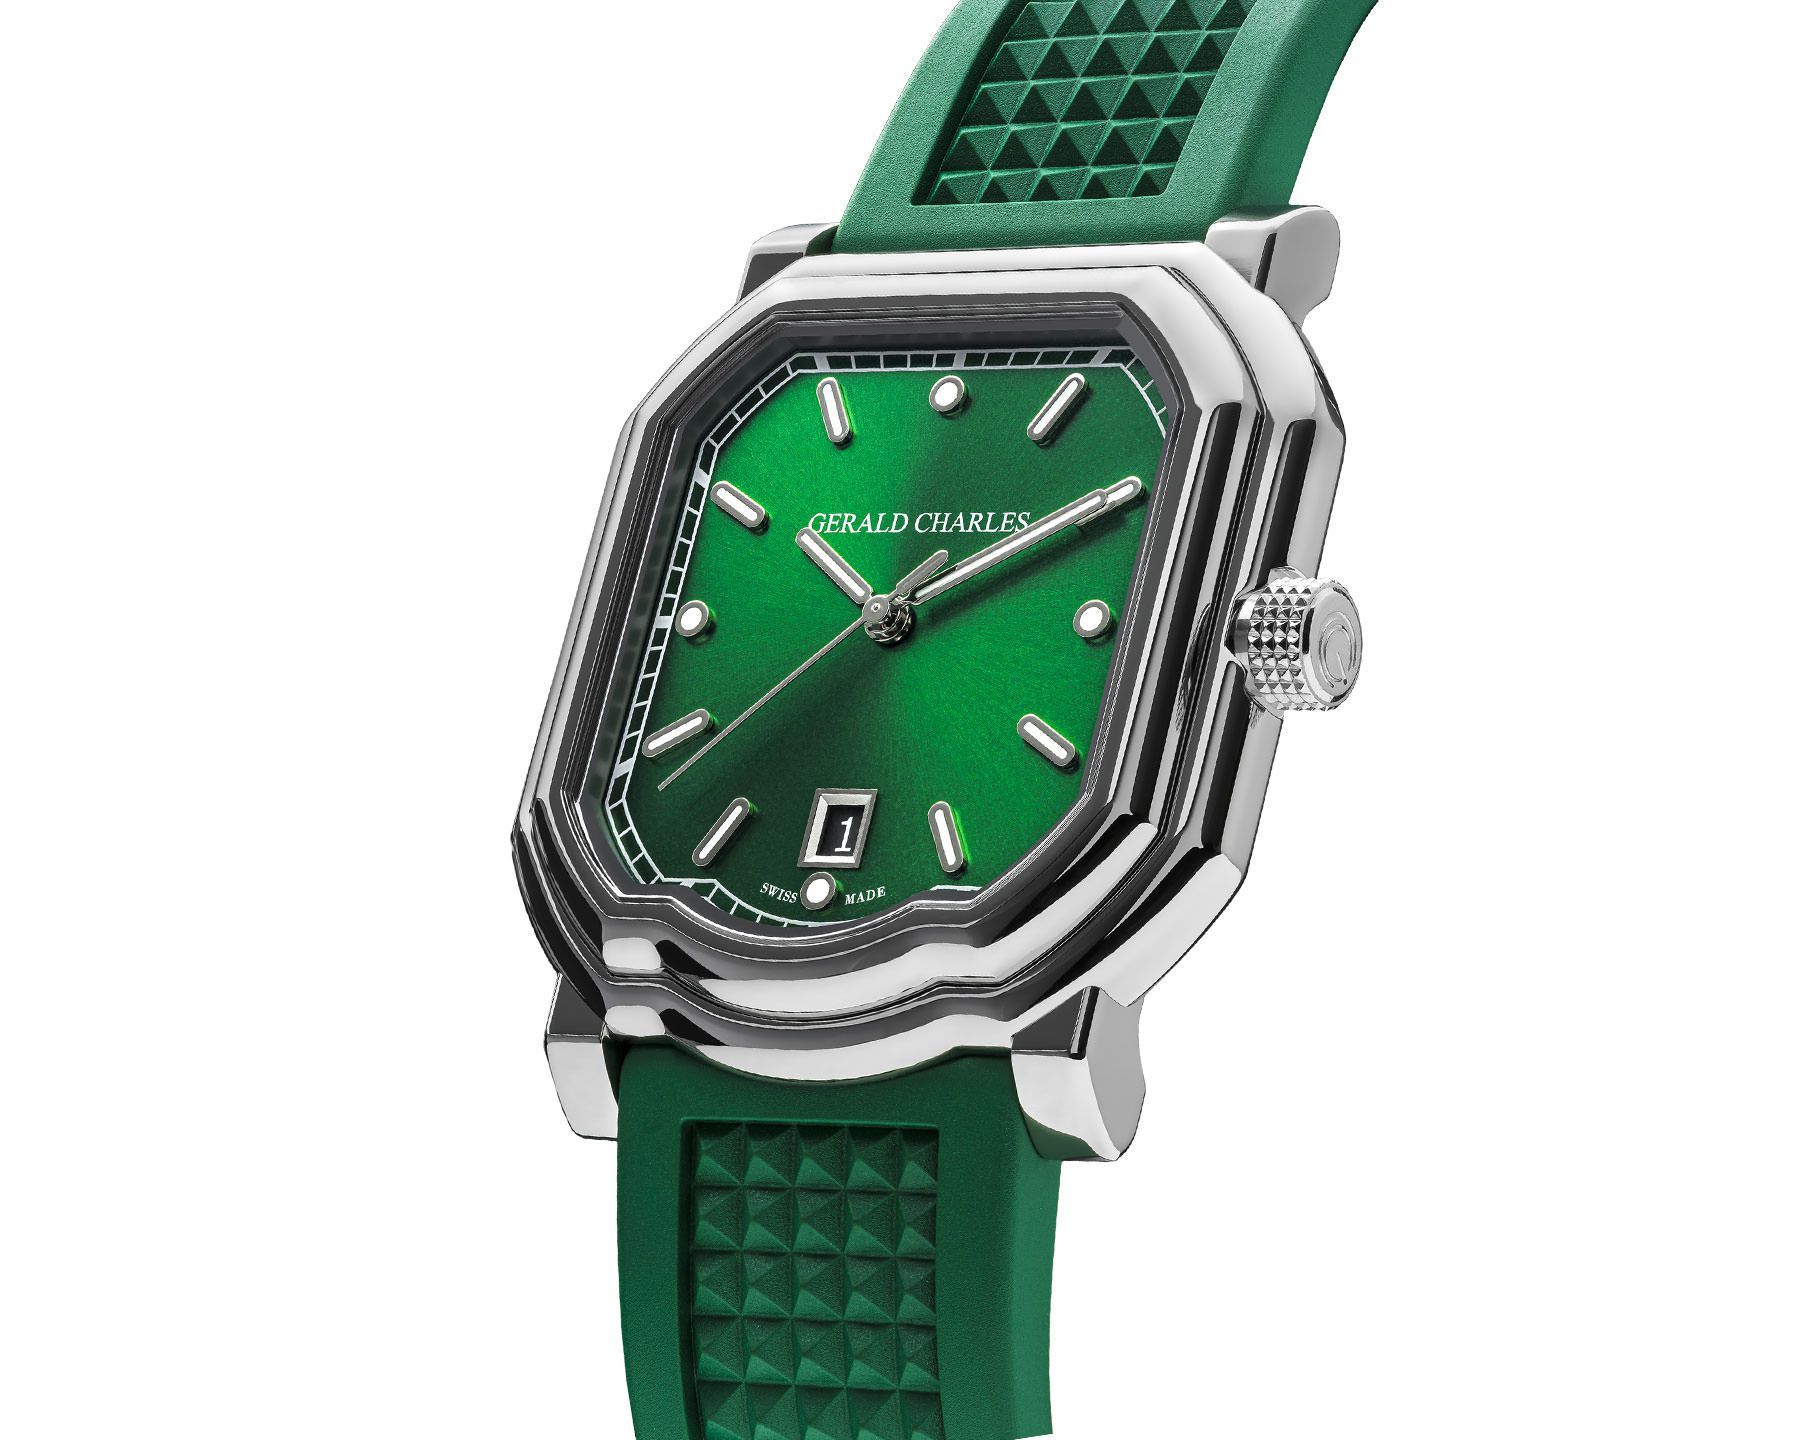 Gerald Charles Maestro Maestro 2.0 Ultra-Thin Green Dial 41.7 mm Automatic Watch For Unisex - 2